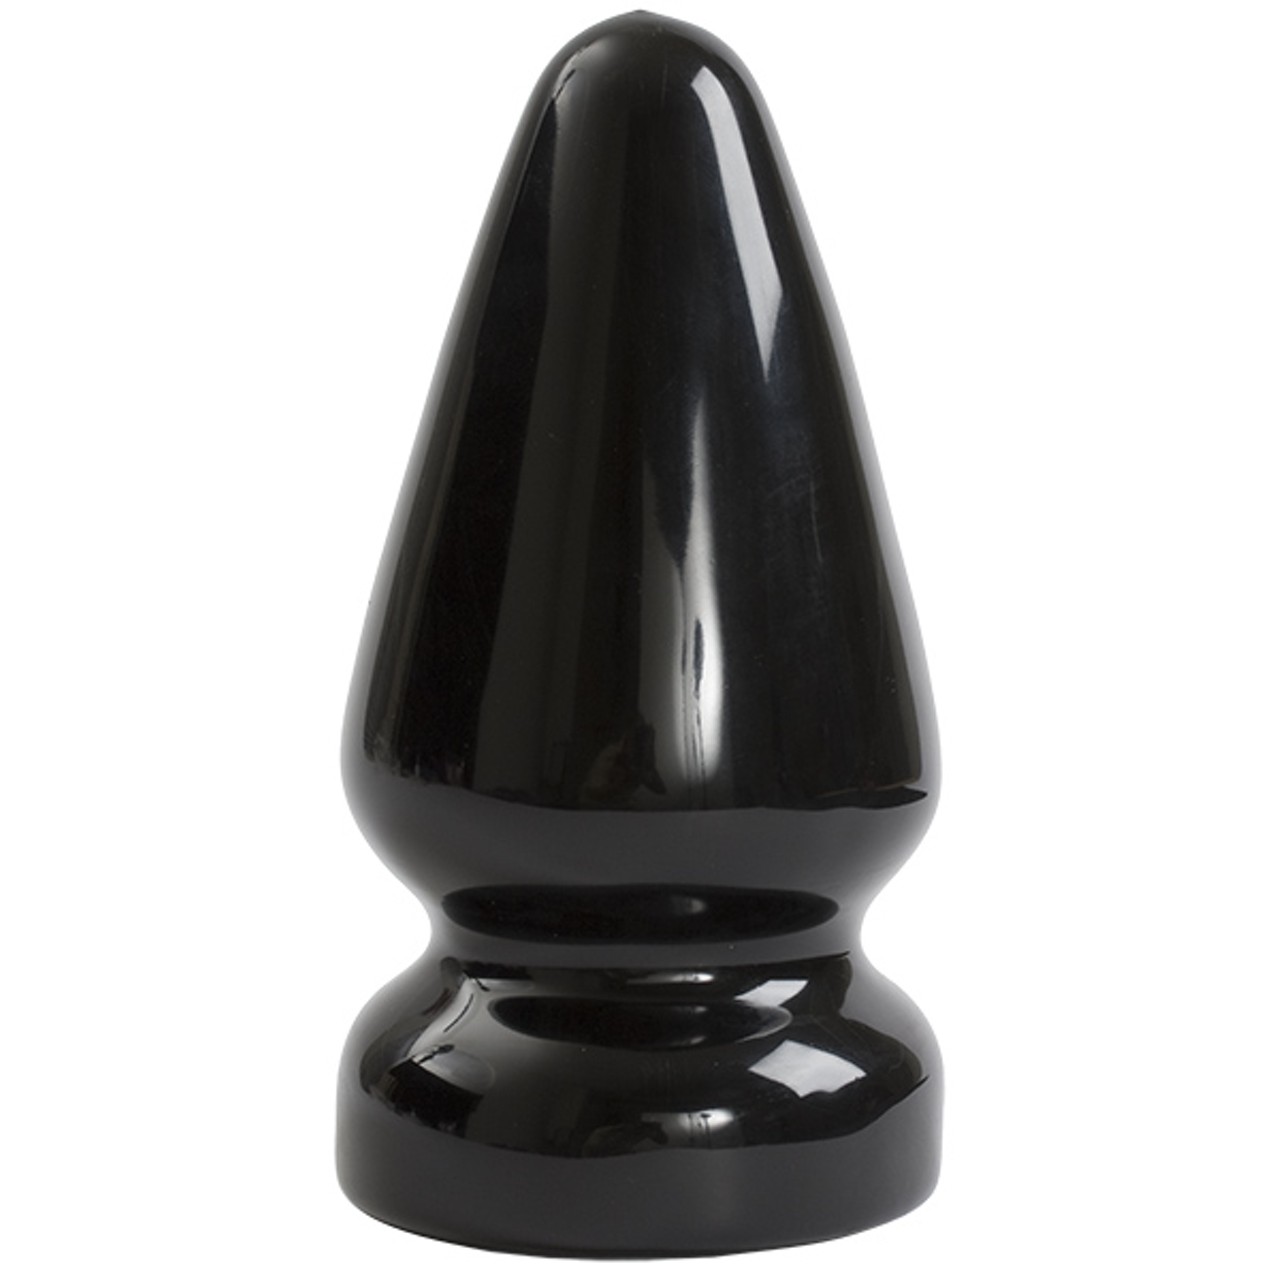 ASS SERVANT PLUG BY TITAN MEN ..........
Can you take it? These are some of the largest anal toys every produced. Two sizes available for intense, advanced anal play:
SERVANT — for the capable pig.
MASTER — for the experienced ass-master.